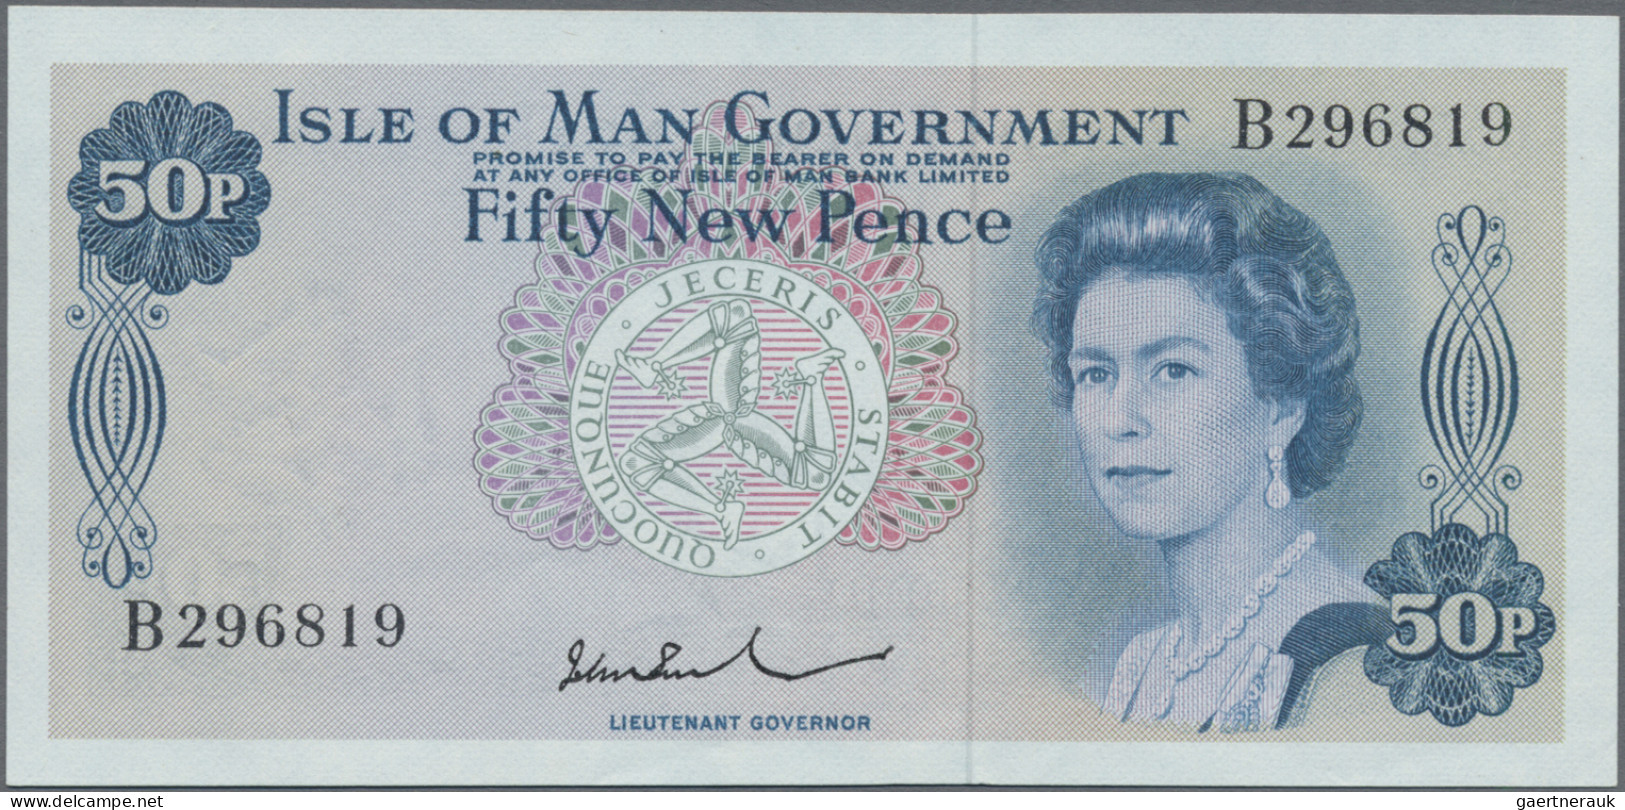 Isle of Man: Isle of Man Government, lot with 6 banknotes, series ND(1972-1979),